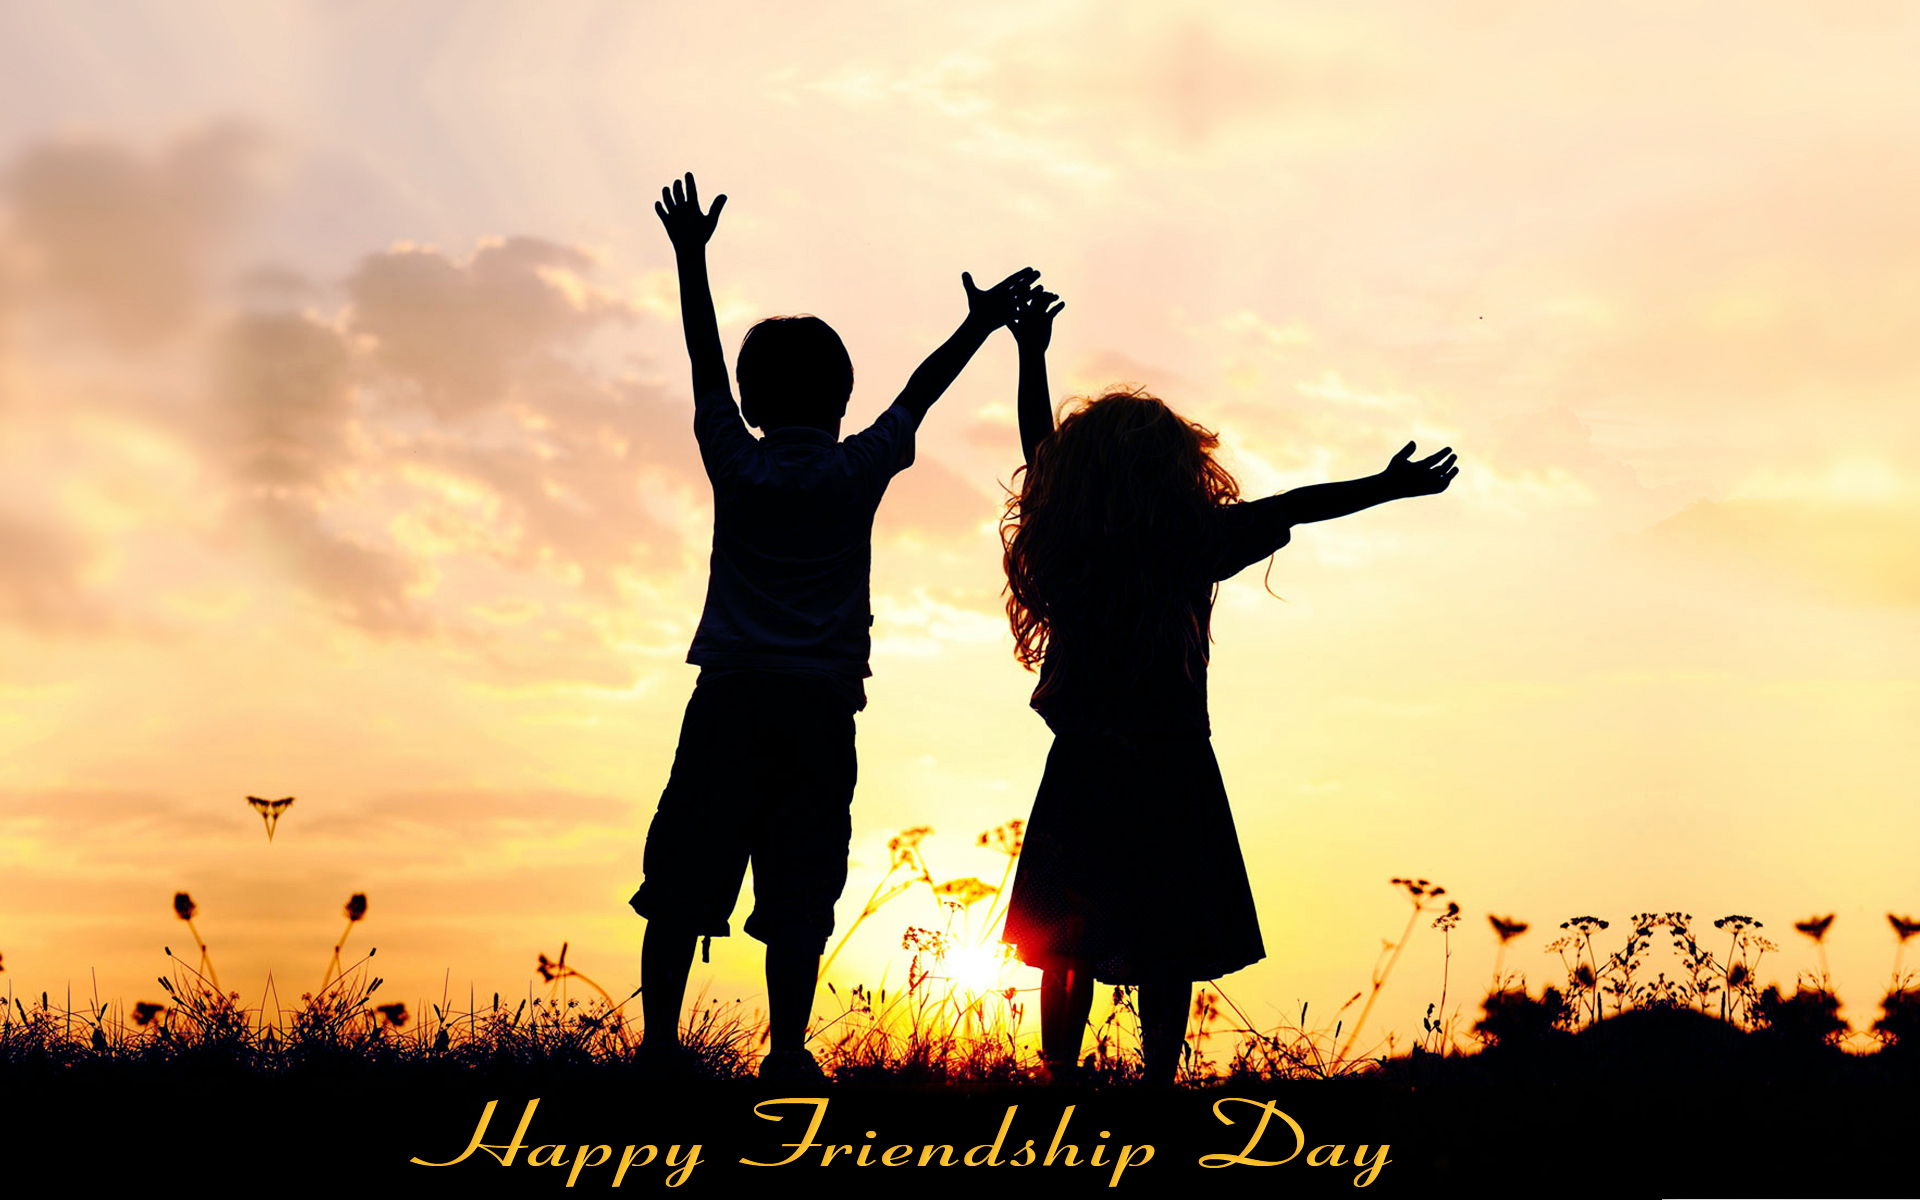 friendship logo wallpapers,people in nature,sky,friendship,happy,love